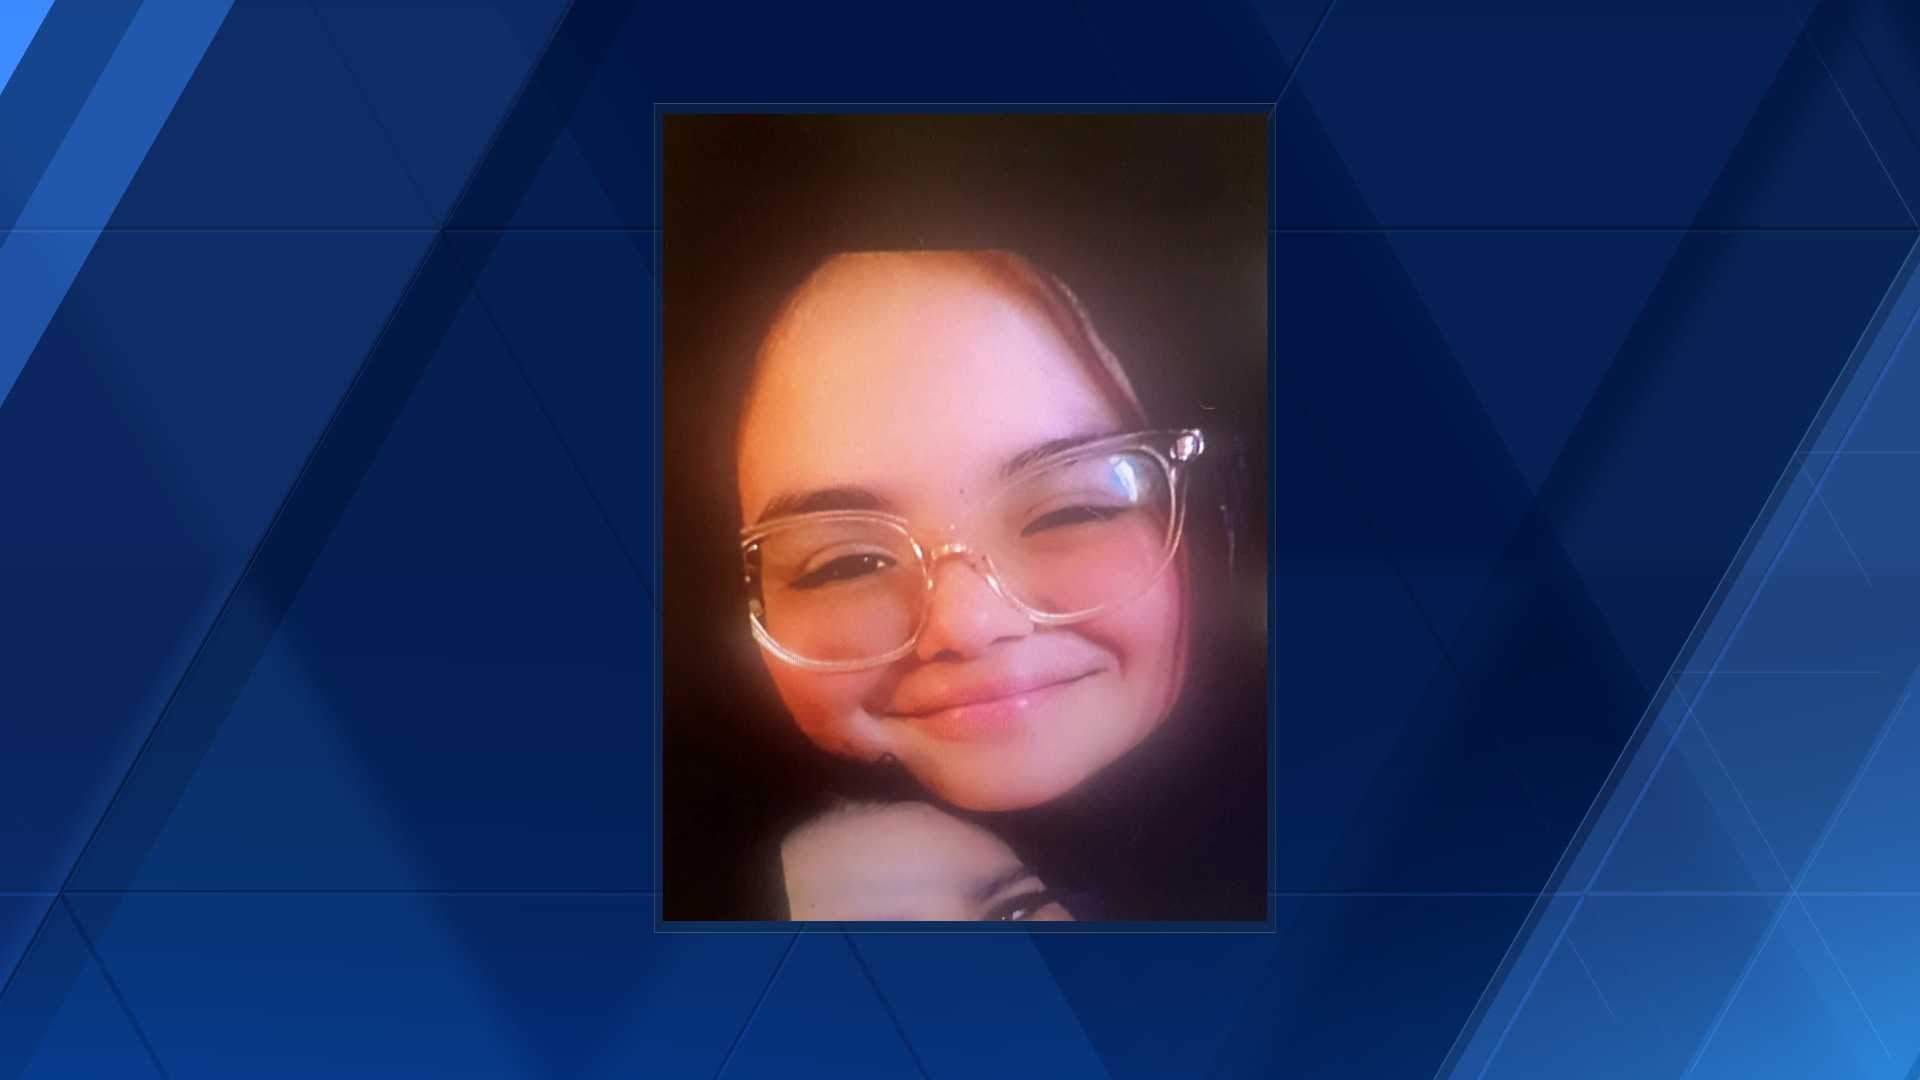 Search for missing 12-year-old, believed to be in Hollister area